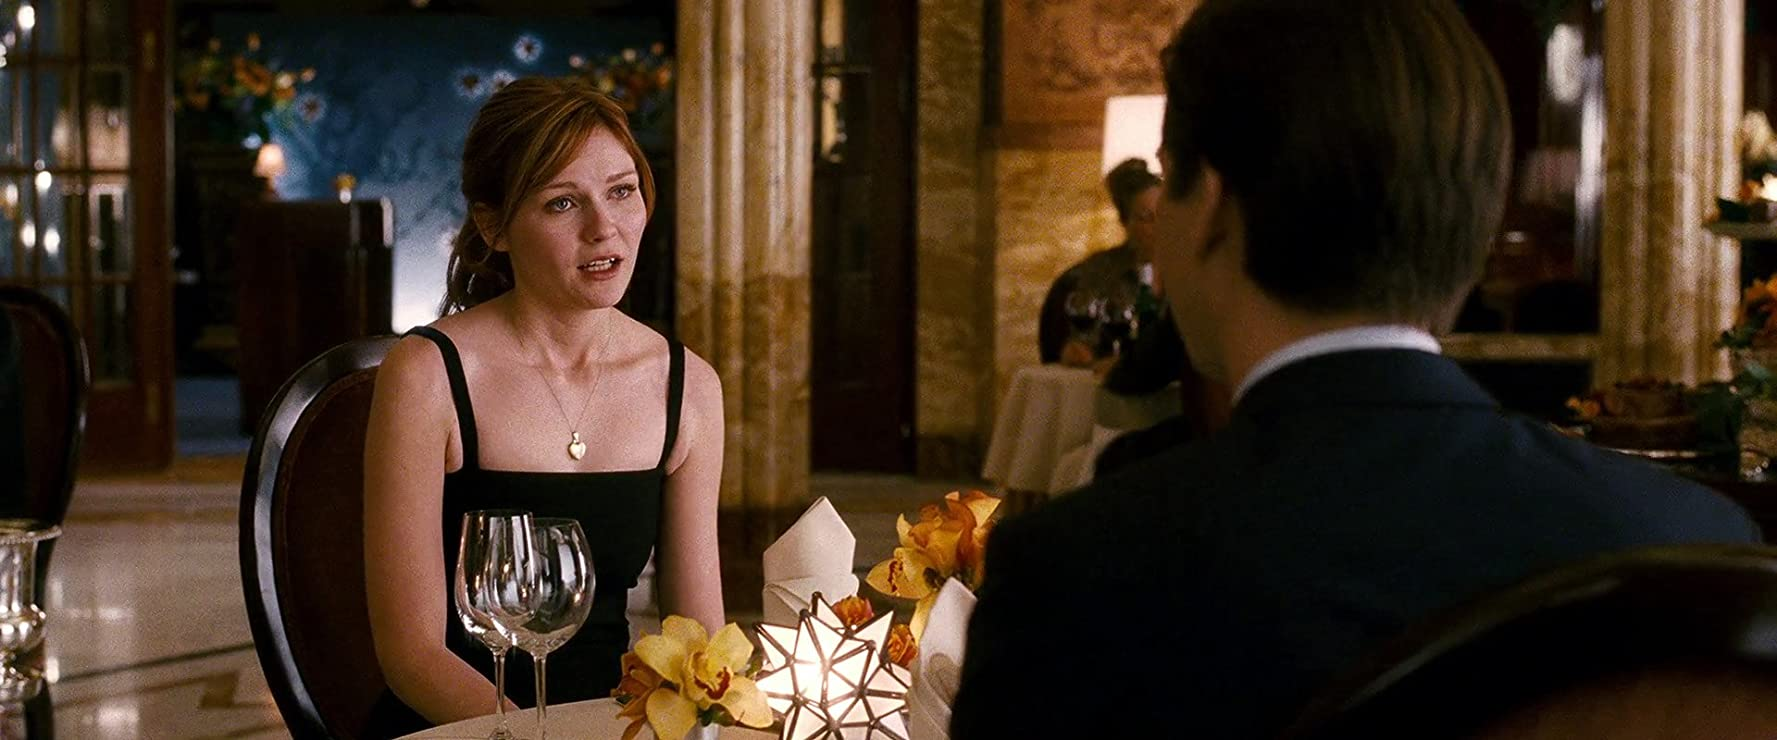 Peter and MJ's romantic dinner collapses before their eyes, but only one of them can see why. (Image: Sony Pictures)